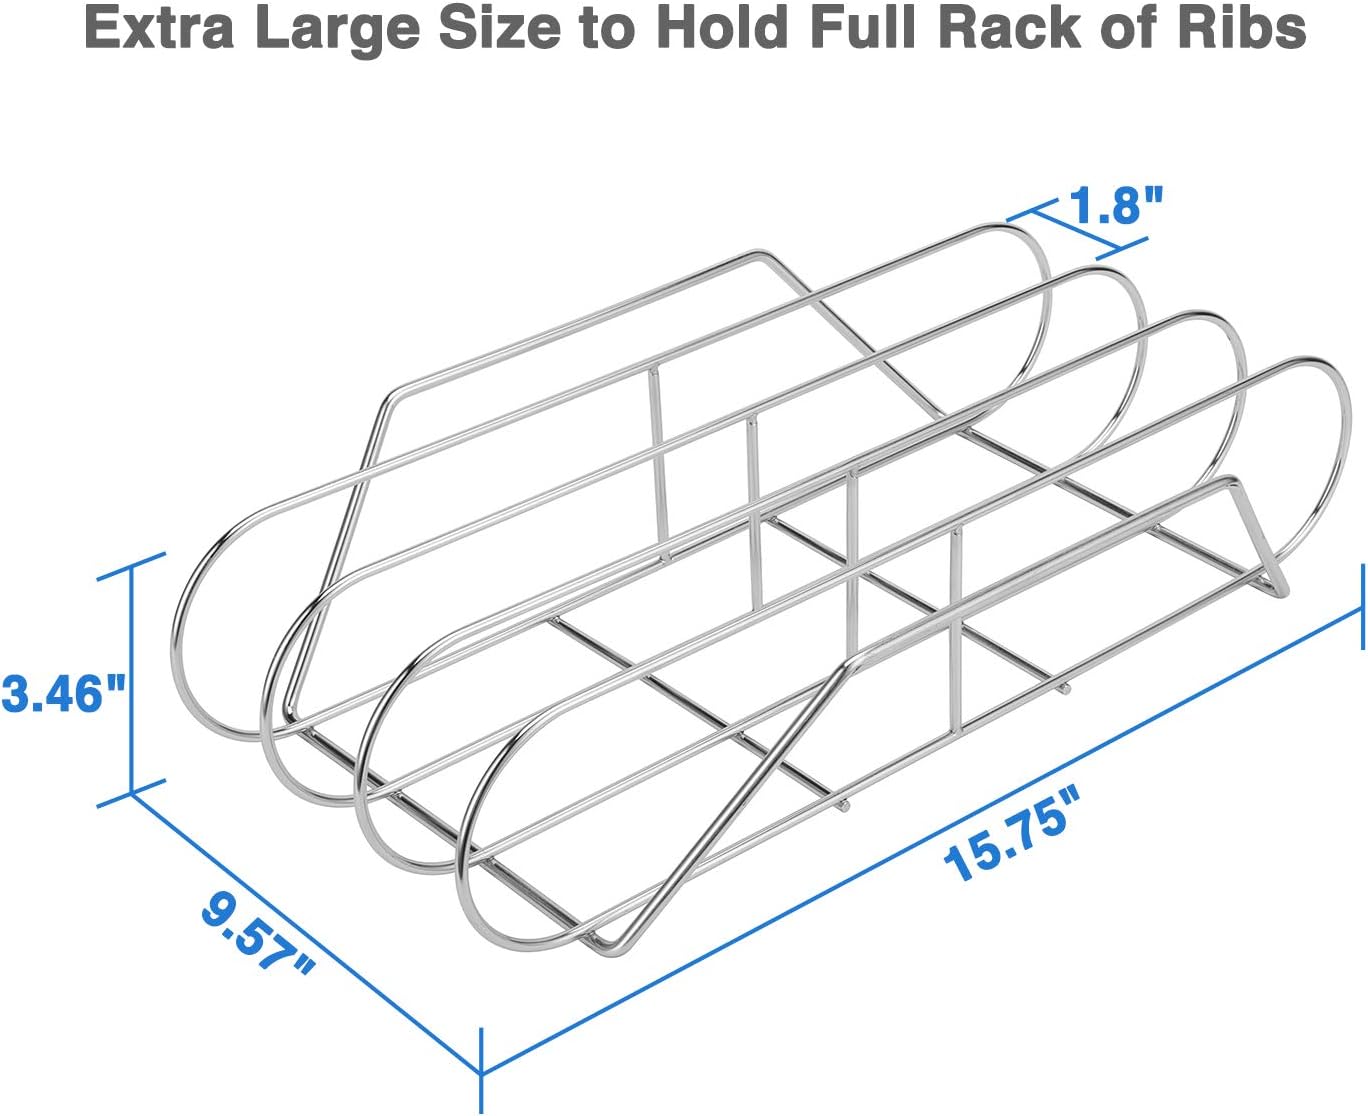 Extra Long Stainless Steel Rib Rack for Smoking and Grilling, Holds up to 3 Full Racks of Ribs, Fits 18” or Larger Gas Smoker or Charcoal Grill, Perfect Smoker Accessories Gifts for Men